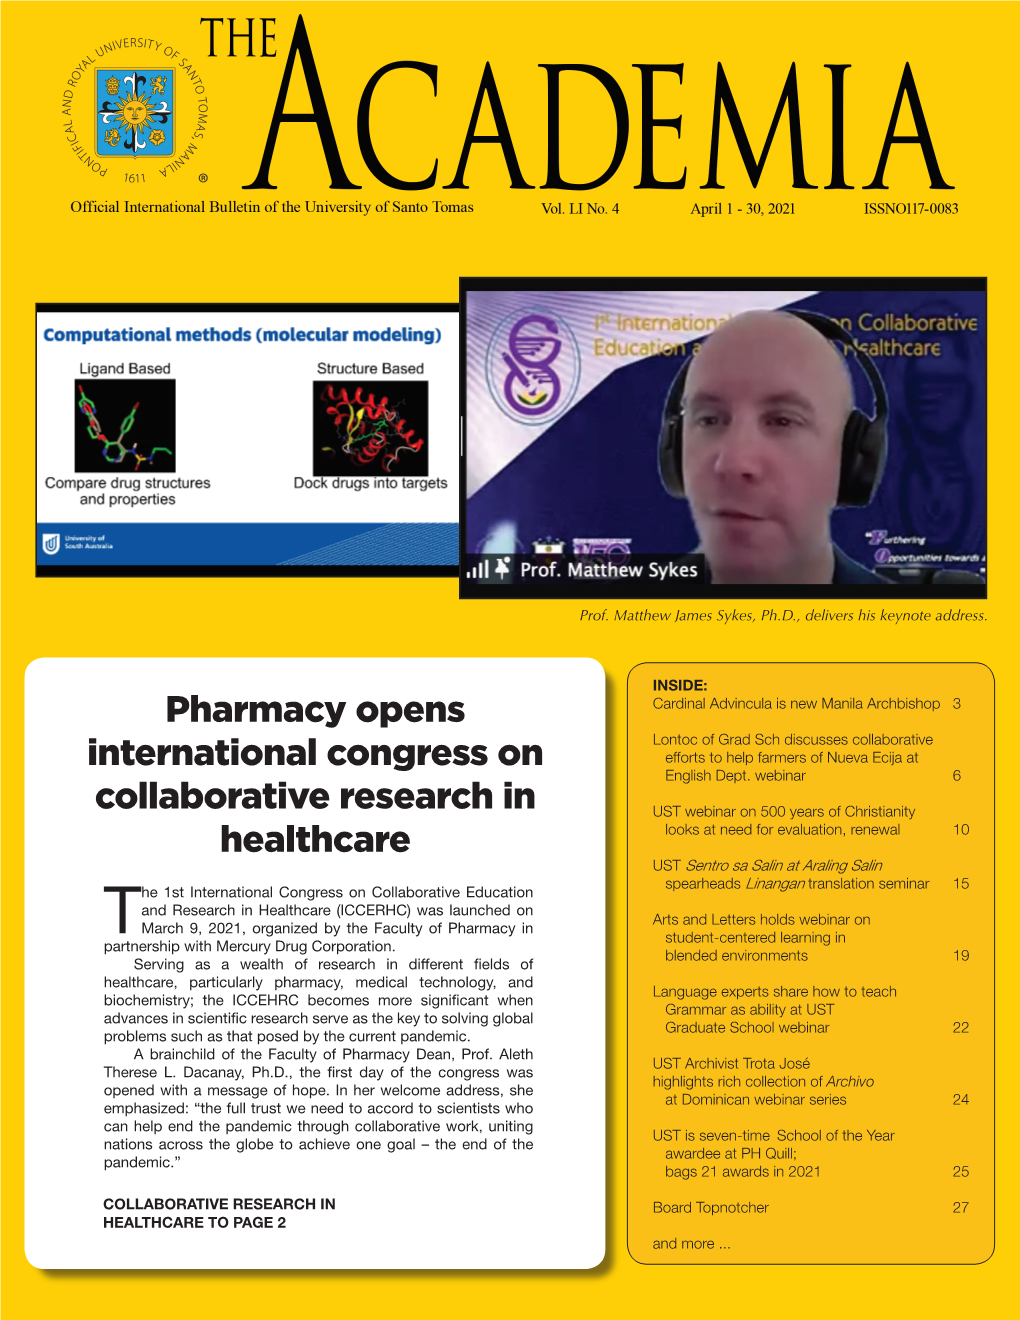 Pharmacy Opens International Congress on Collaborative Research